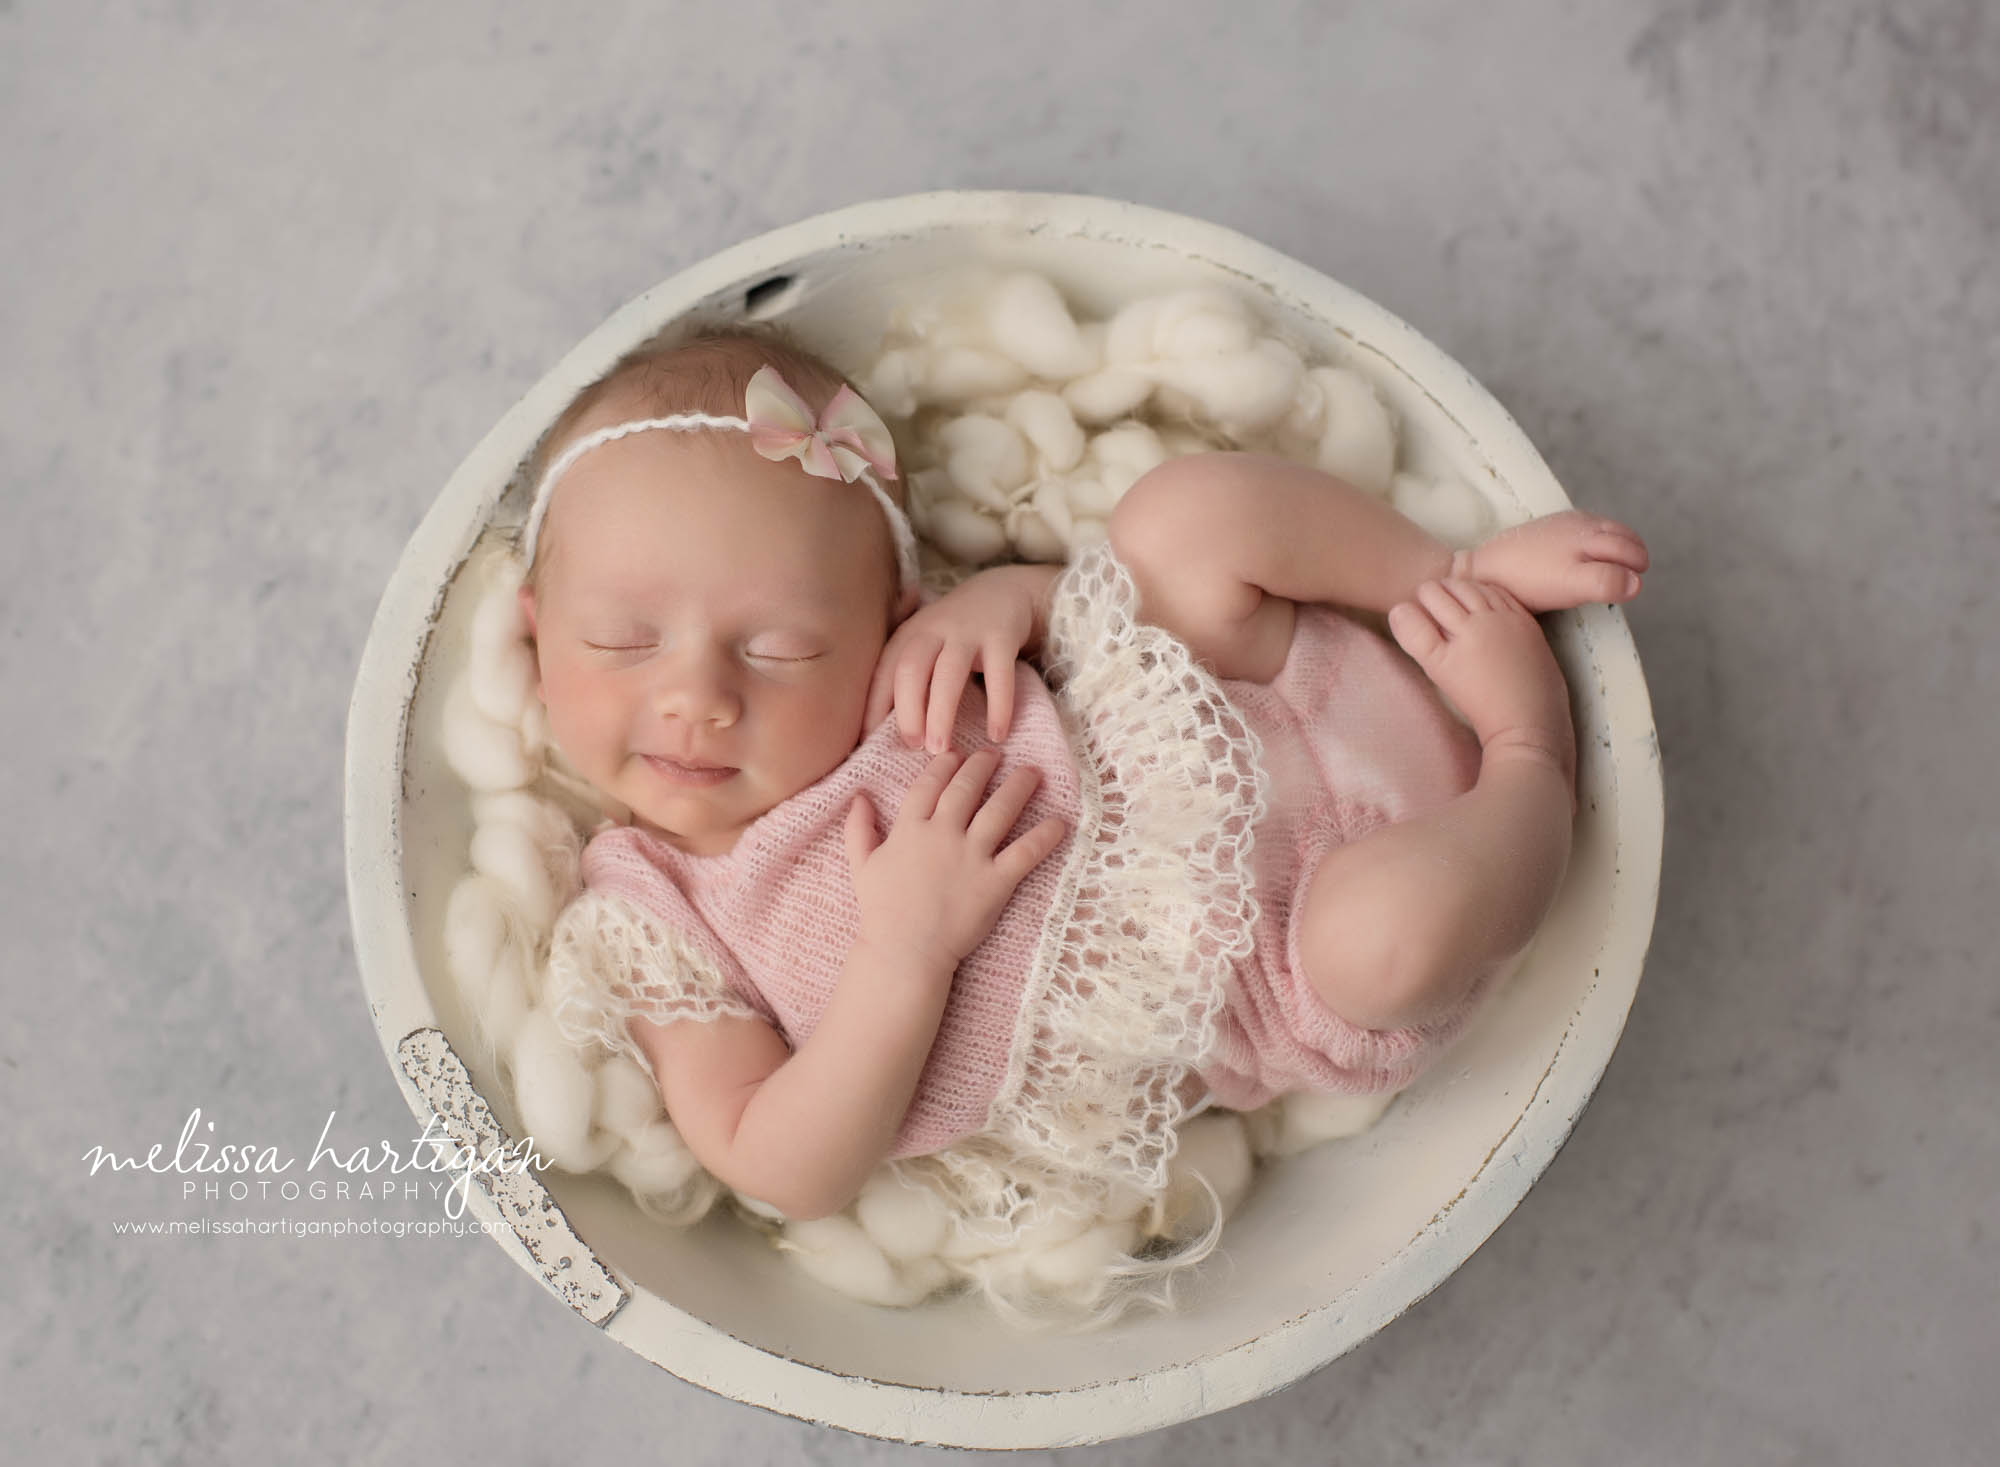 newborn baby girl wearing knitted light pink and cream knitted outfit with pink bow headband sleeping smiling hartford county newborn photography